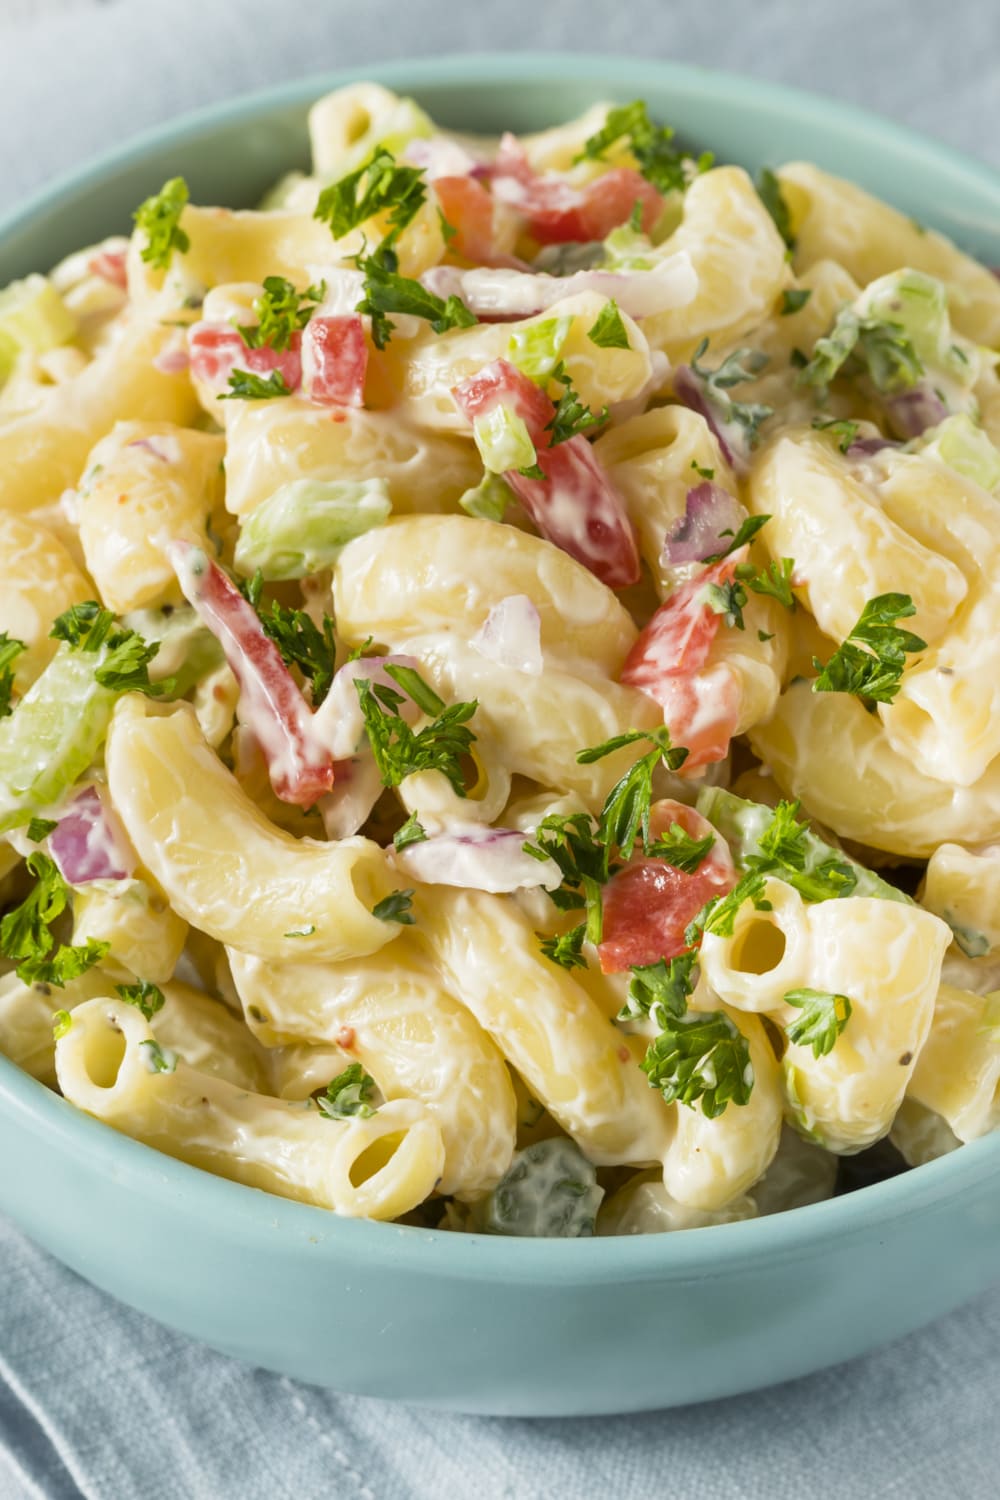 Creamy Macaroni Salad with Herbs and Vegetables